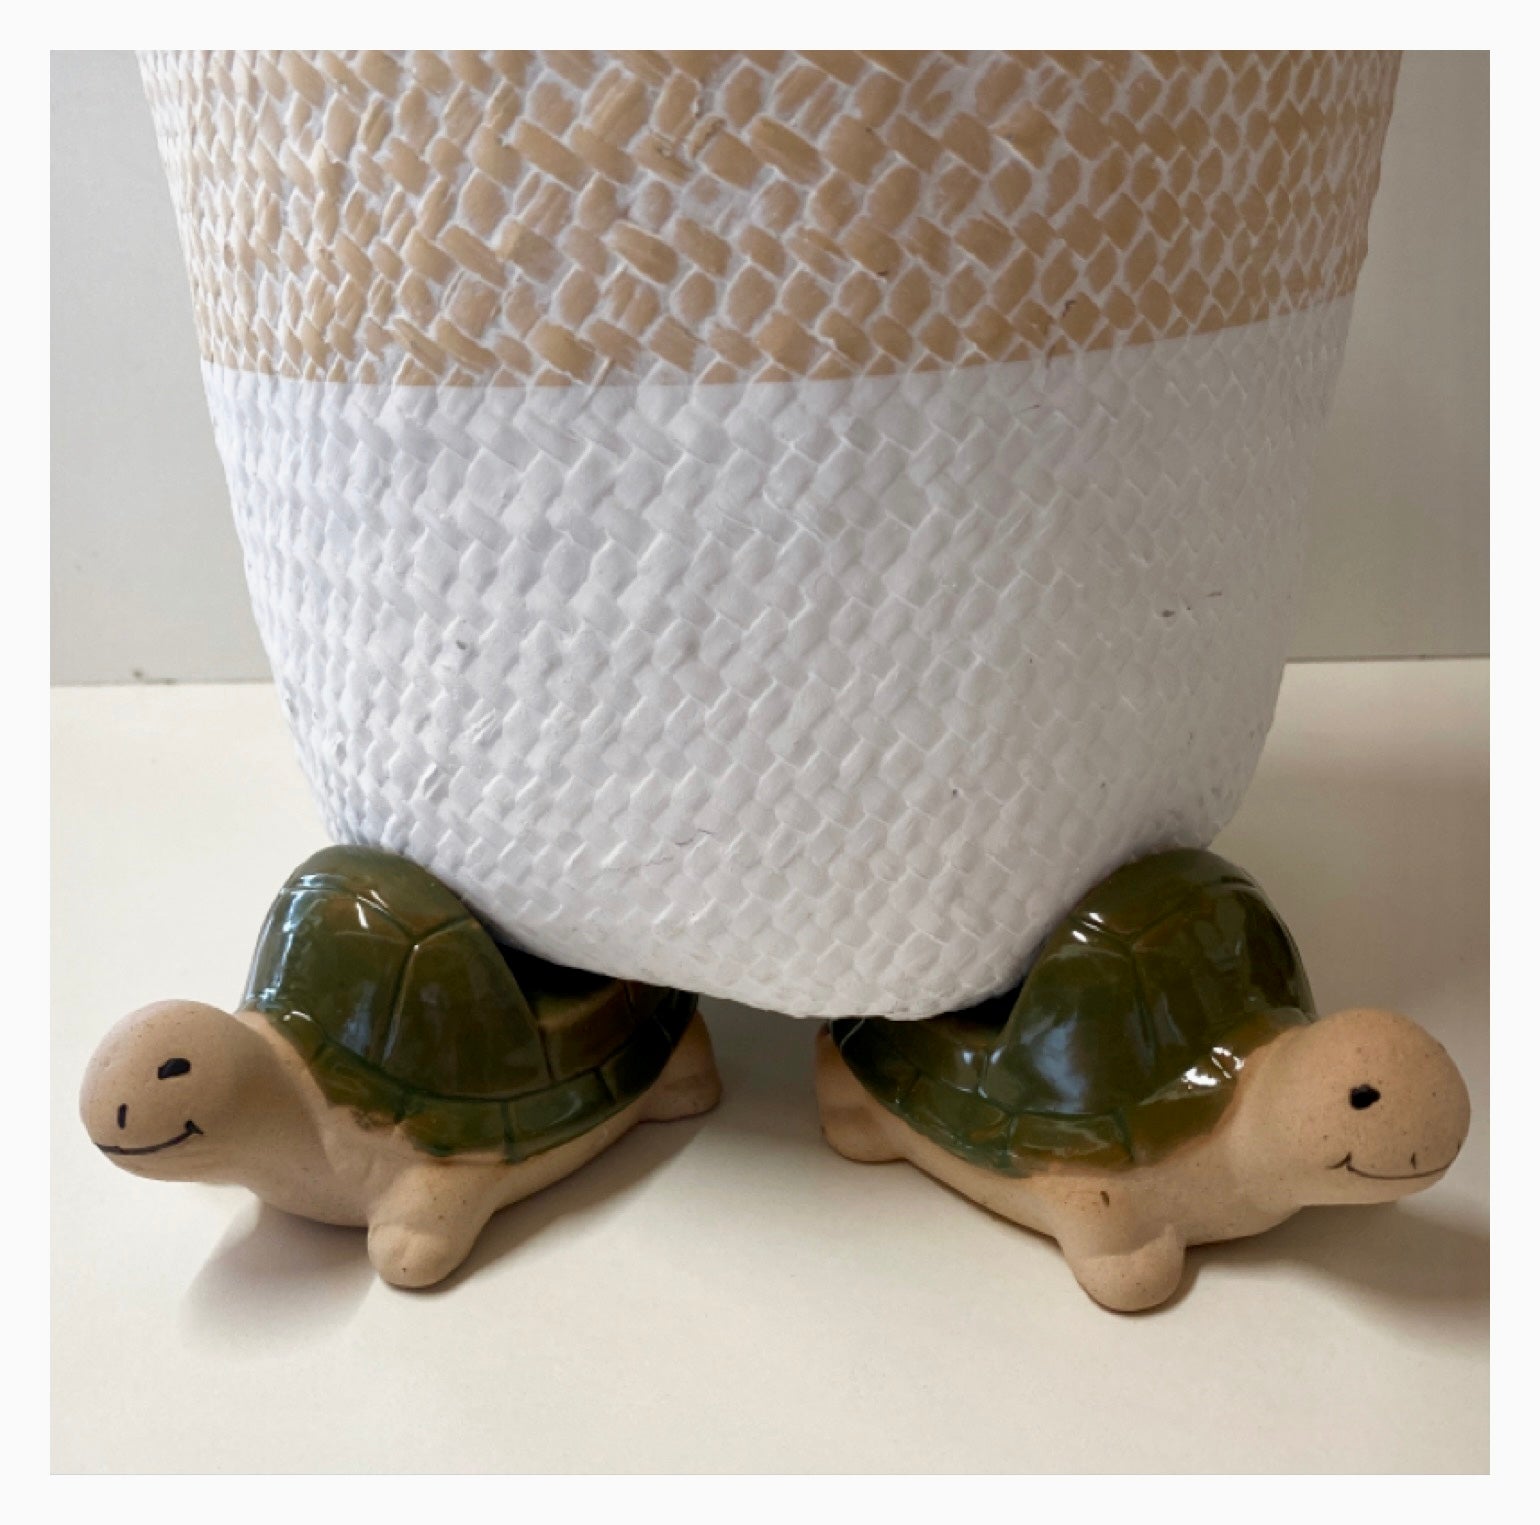 Pot Plant Feet Turtle Set of 3 Green - The Renmy Store Homewares & Gifts 